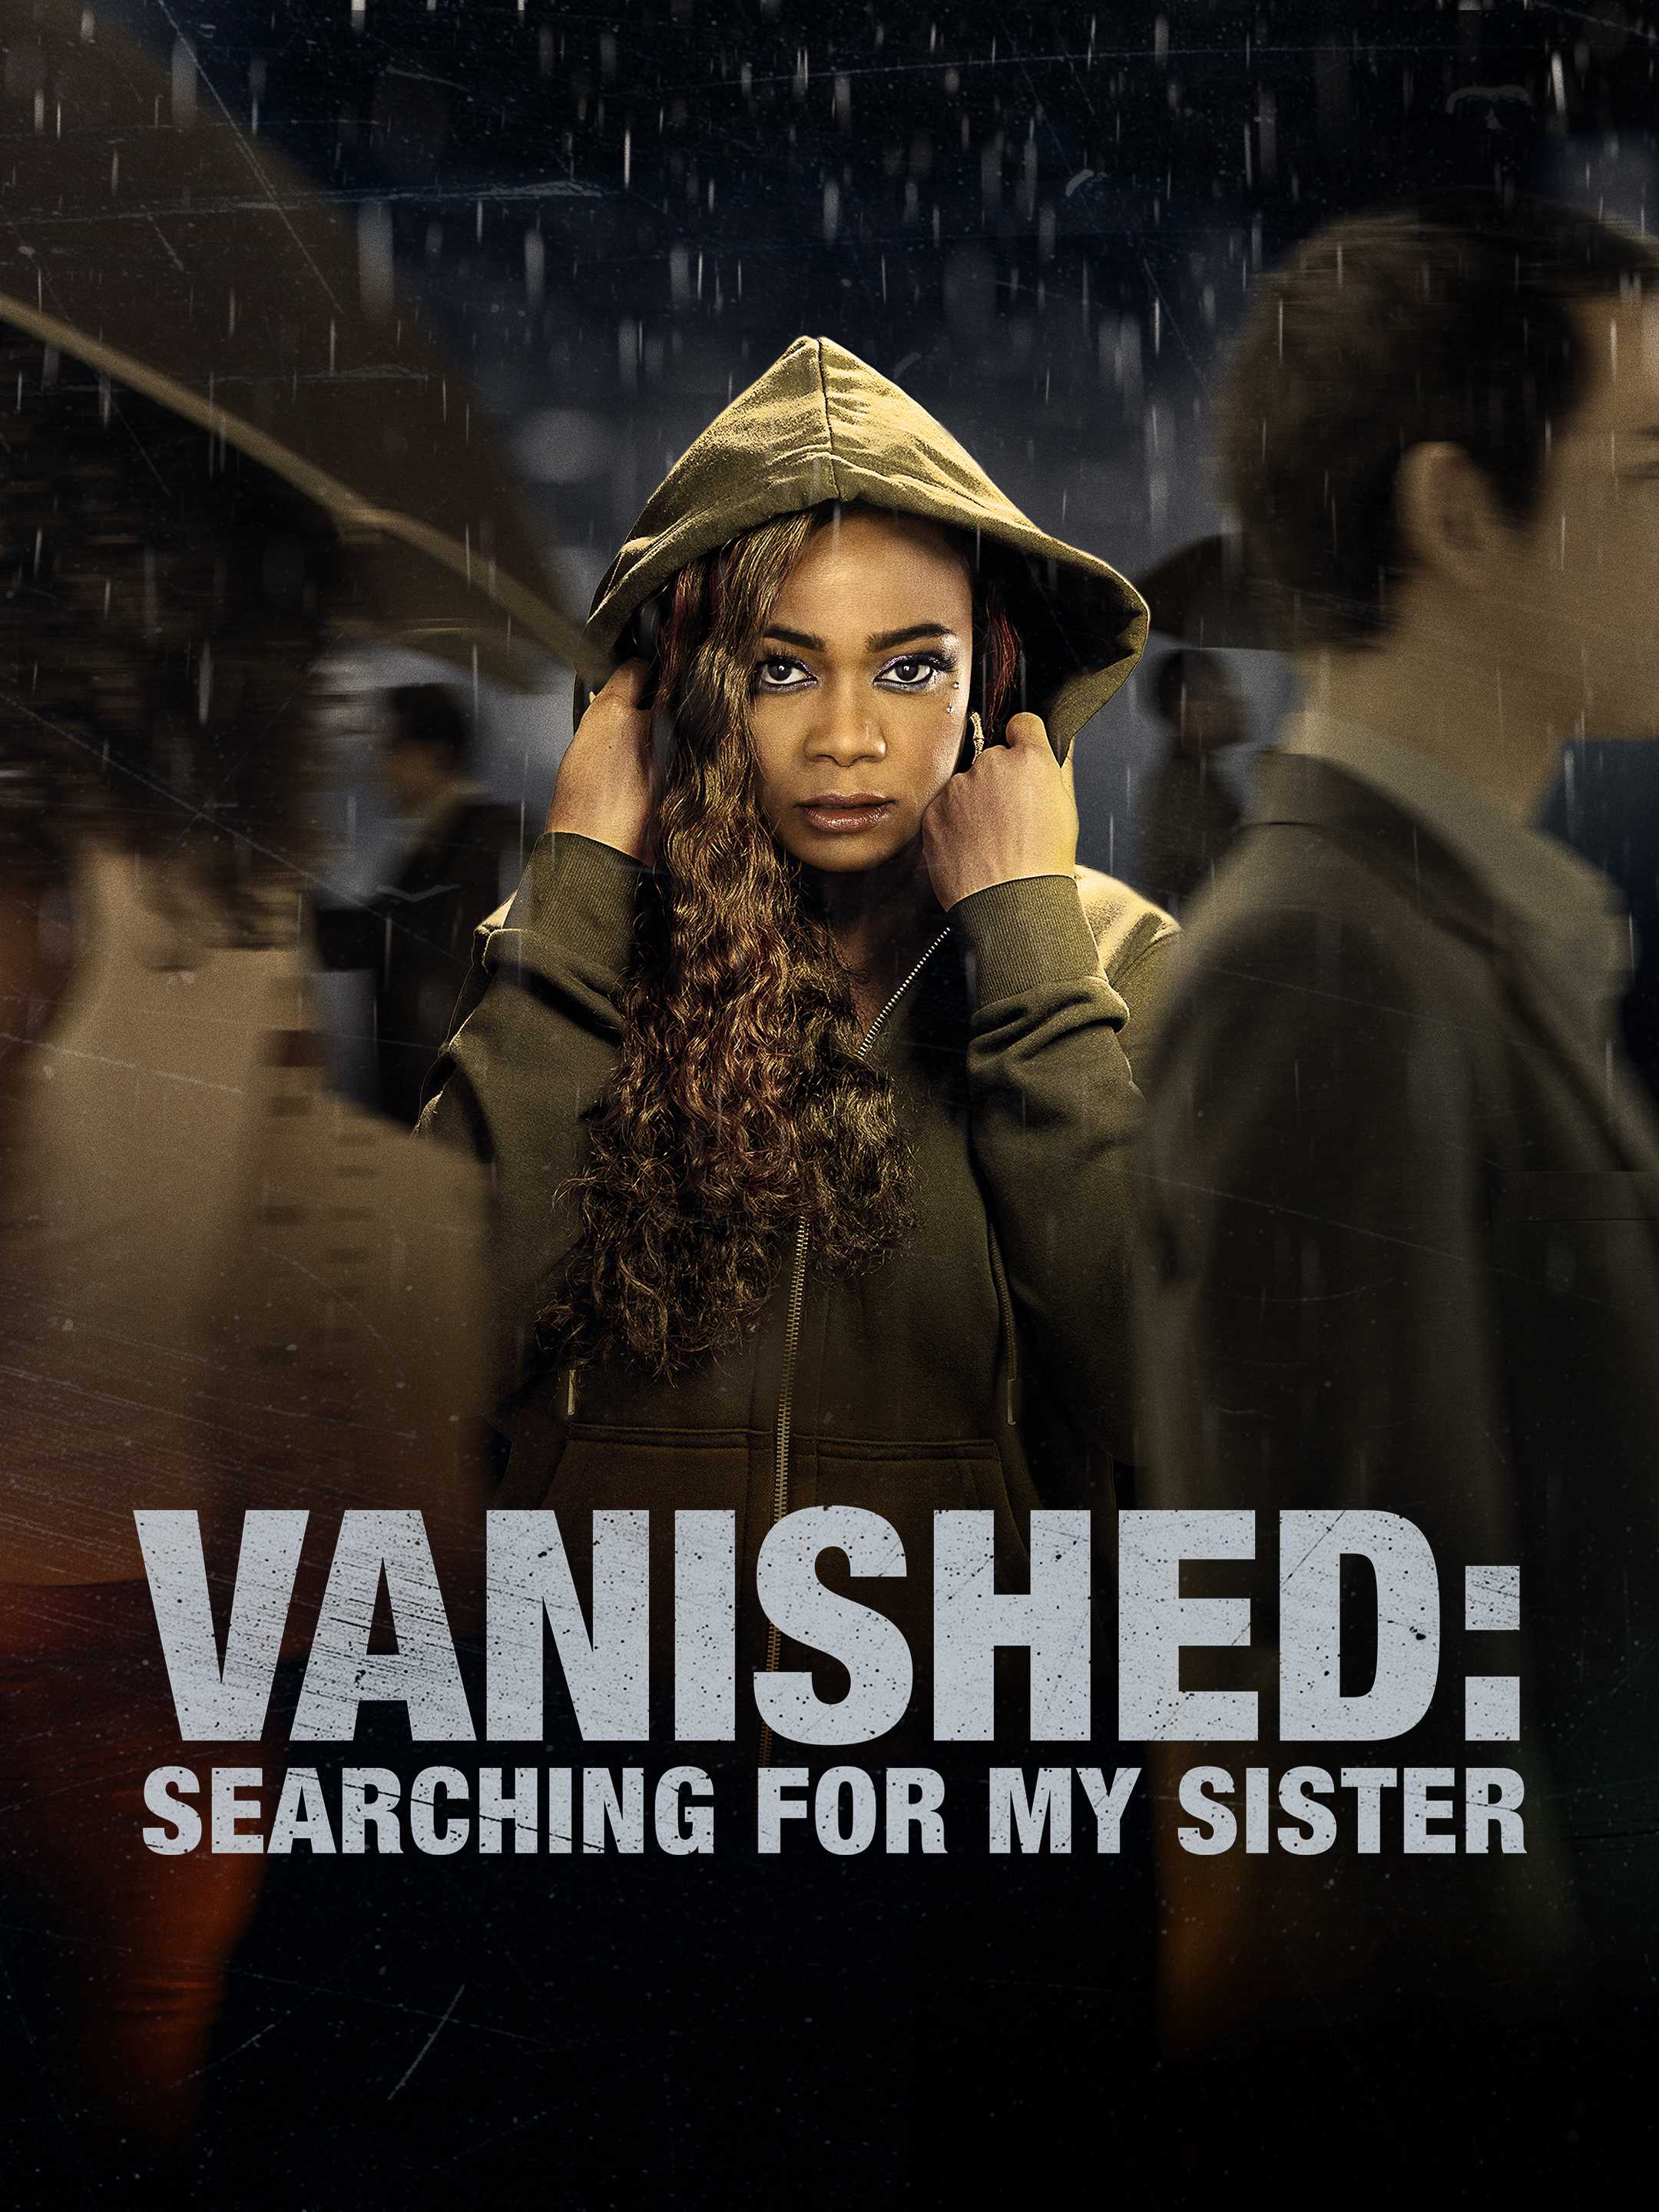 Vanished Searching for My Sister 2022 English 720p HDRip ESub 800MB Download